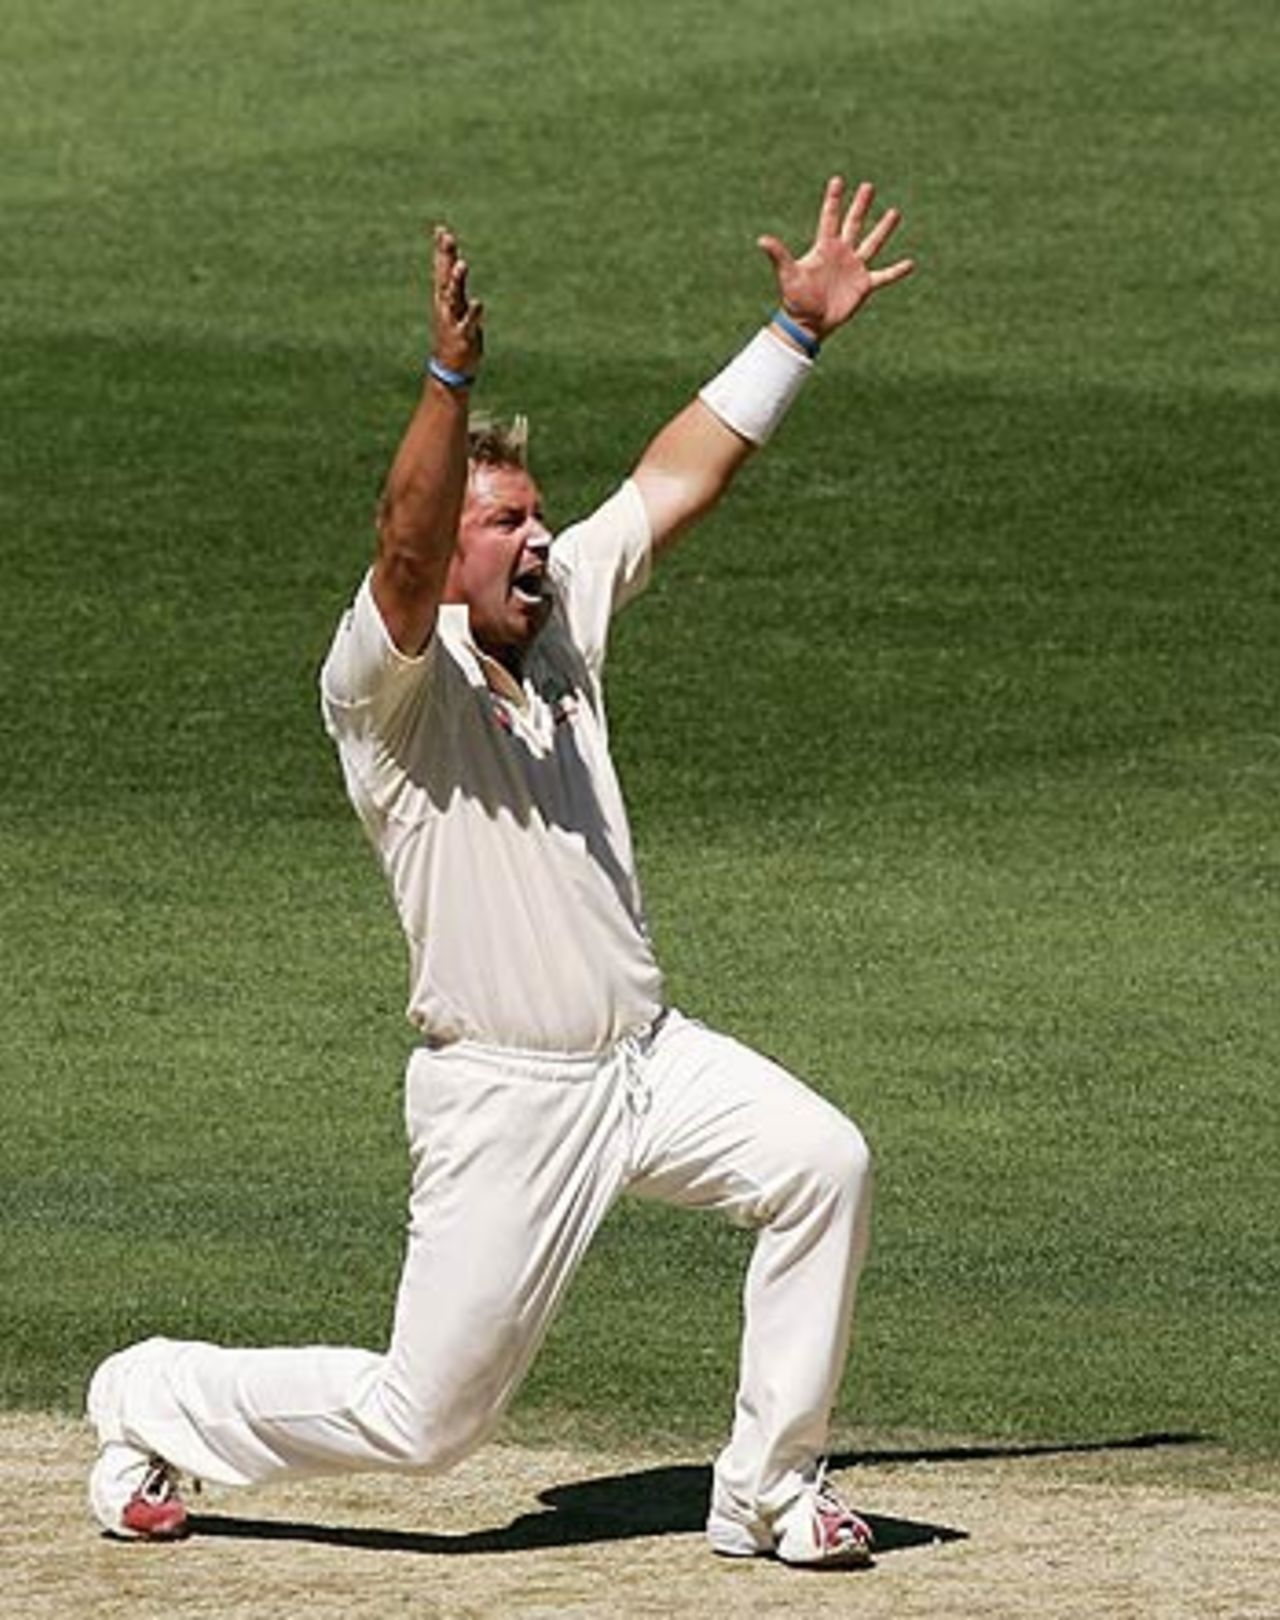 Shane Warne ended the year with 96 Test wickets, Australia v South Africa, 2nd Test, Melbourne, 4th day, December 30, 2005